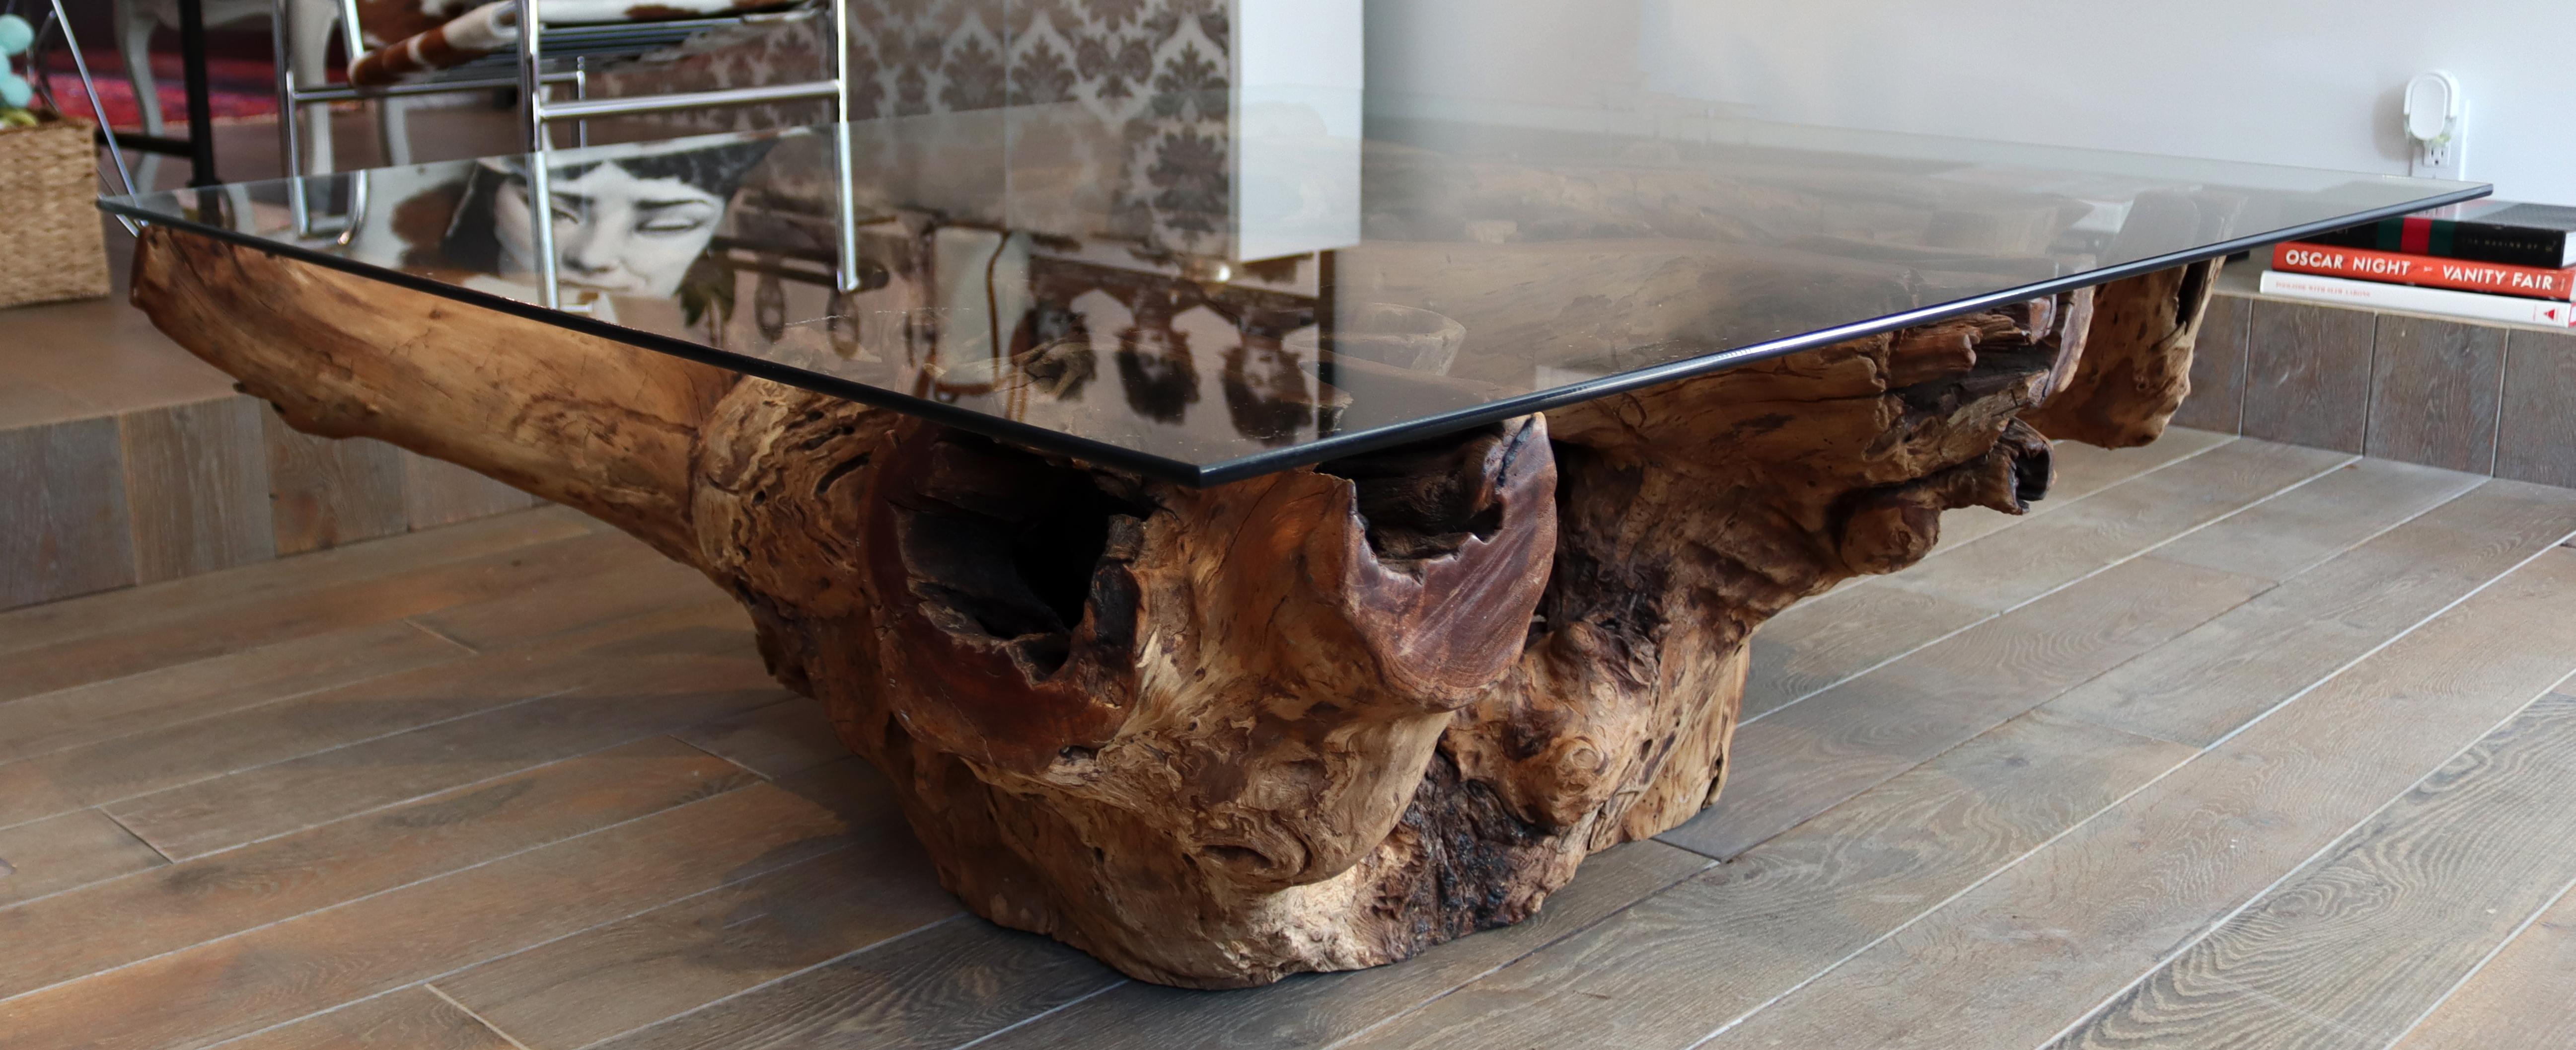 For your consideration is a stupendous, low and square coffee table, made of driftwood, and with a glass top. In excellent condition. The dimensions are 51